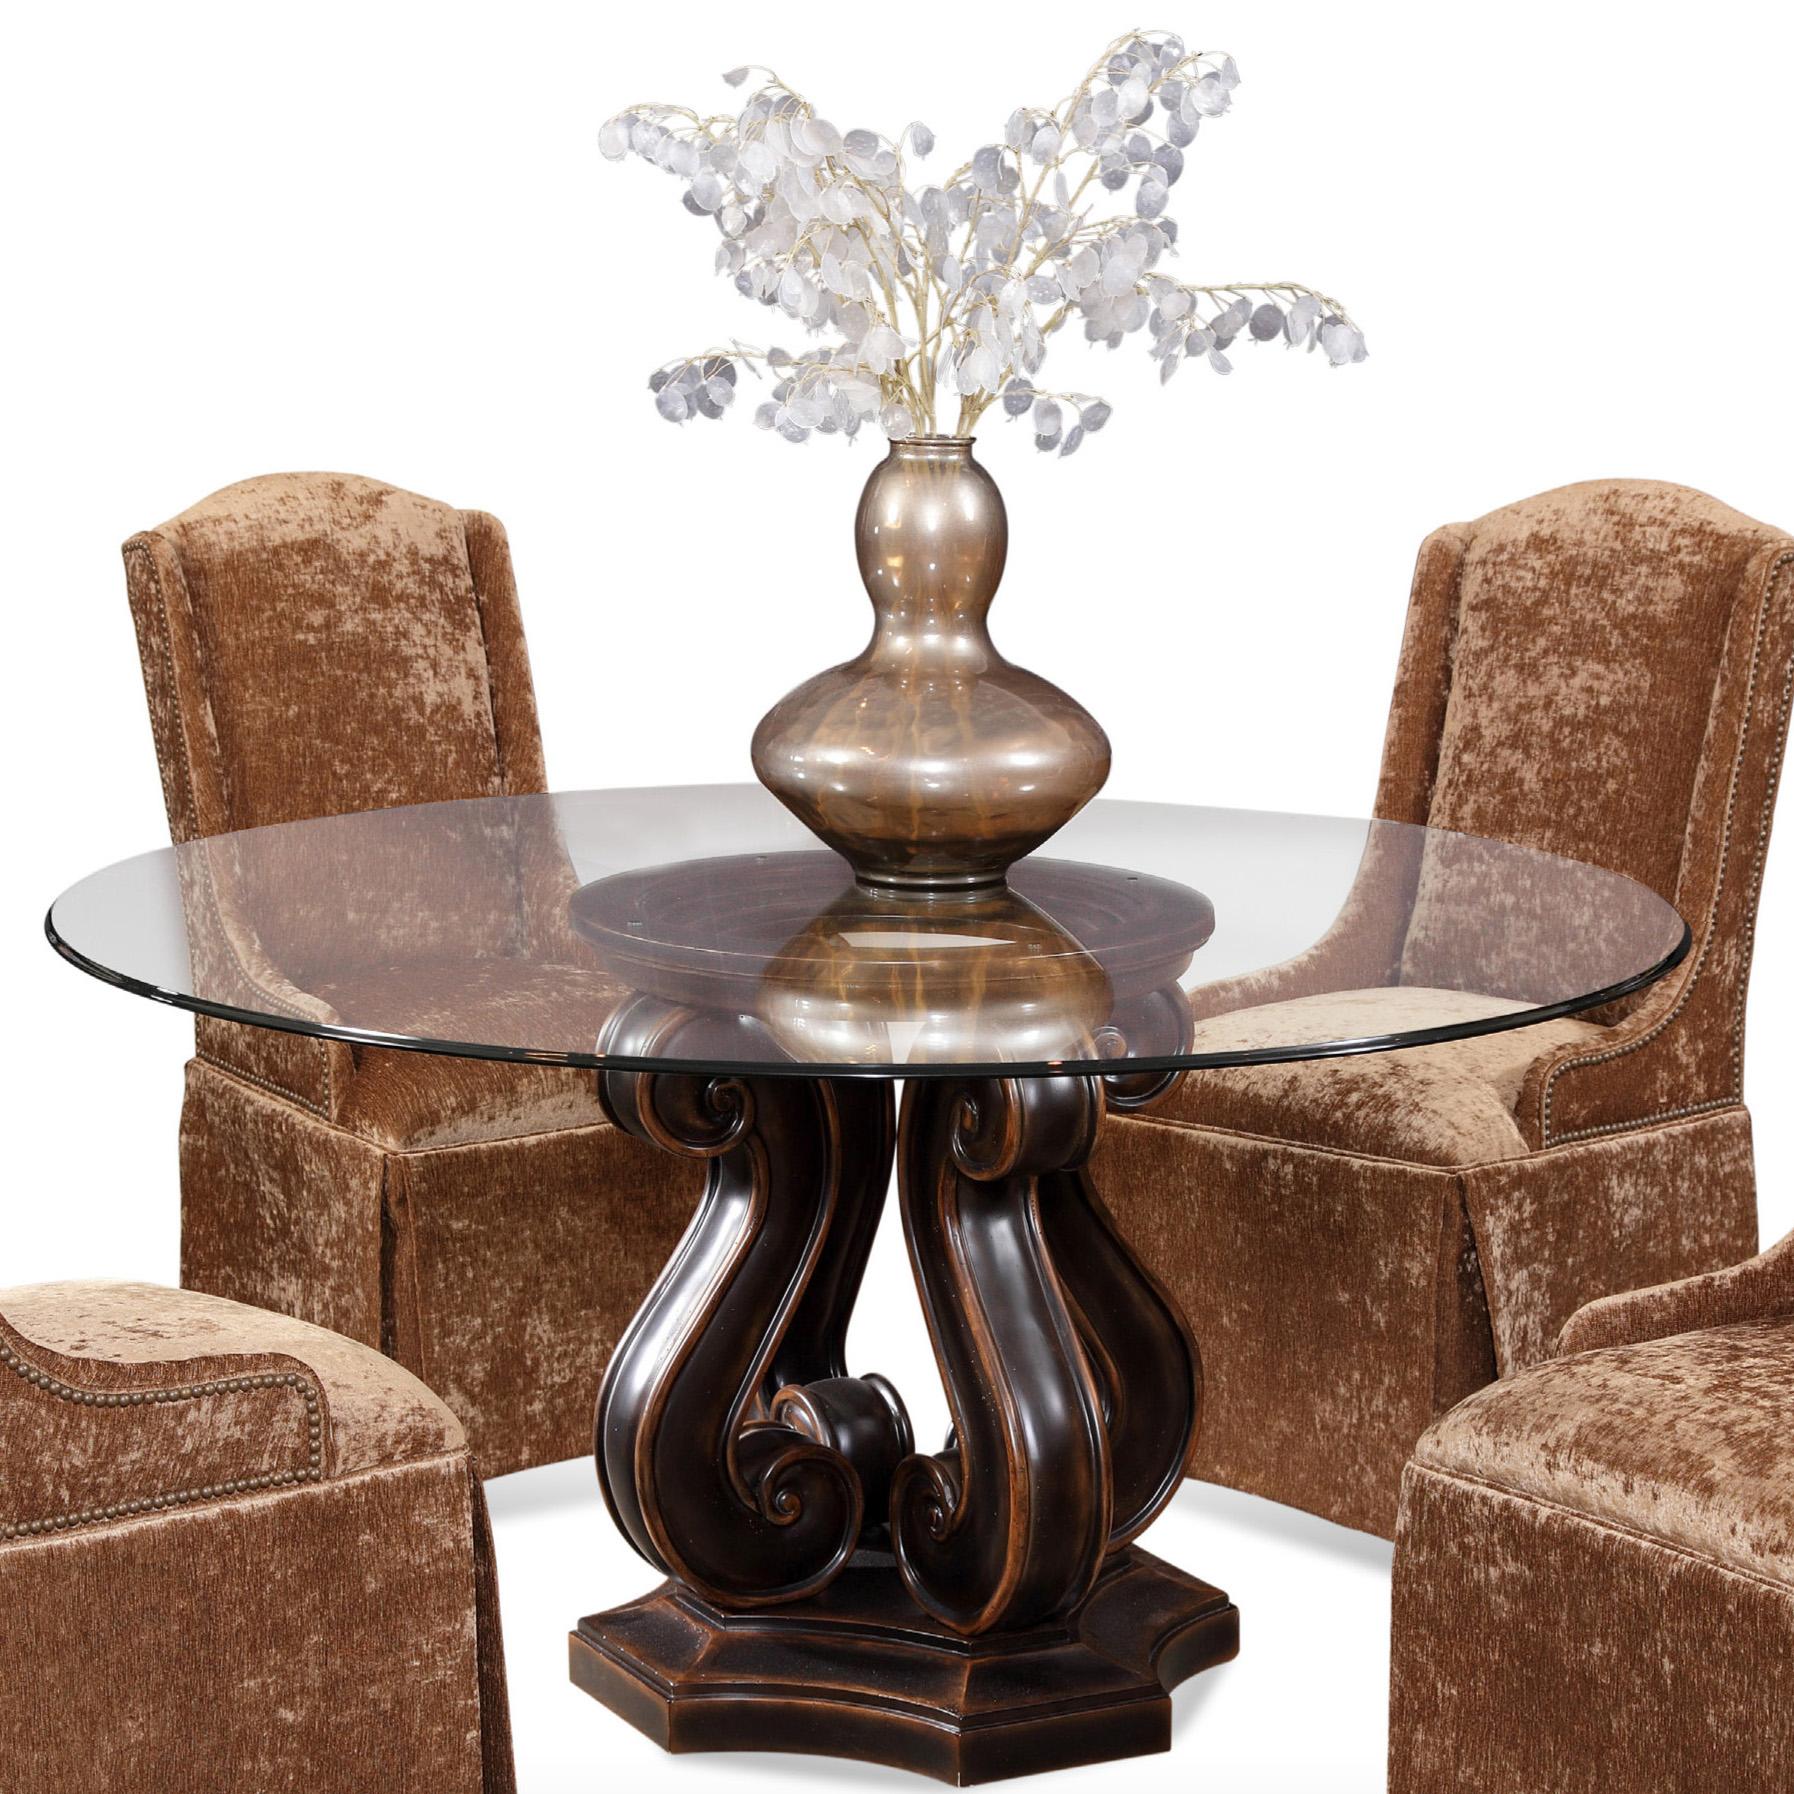 Round Glass Top Pedestal Dining Table